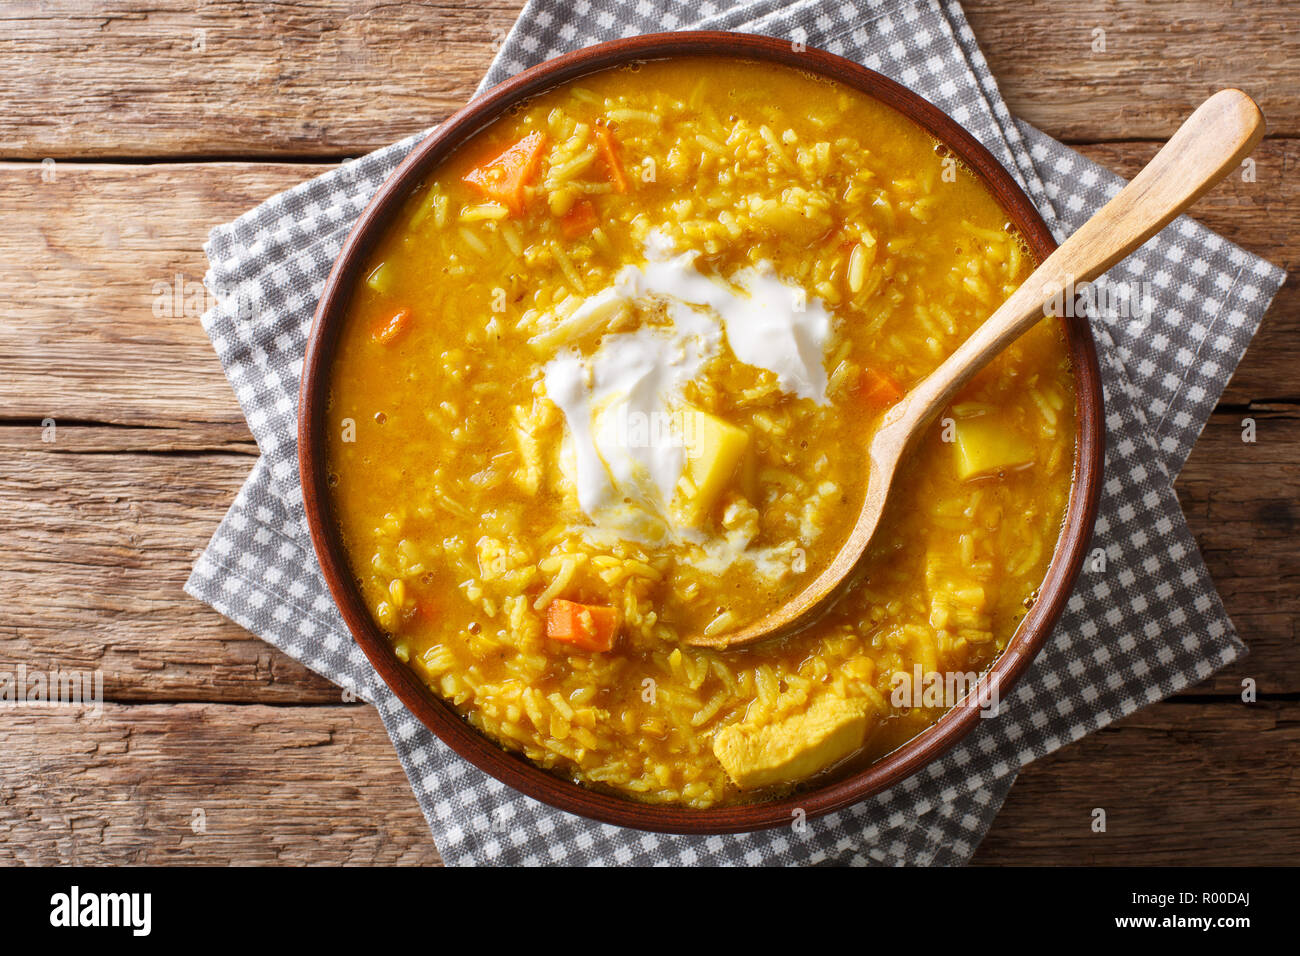 Delicious Tamil Mulligatawny soup with lentils, rice, chicken, vegetables and apple closeup in a bowl on the table. Horizontal top view from above Stock Photo